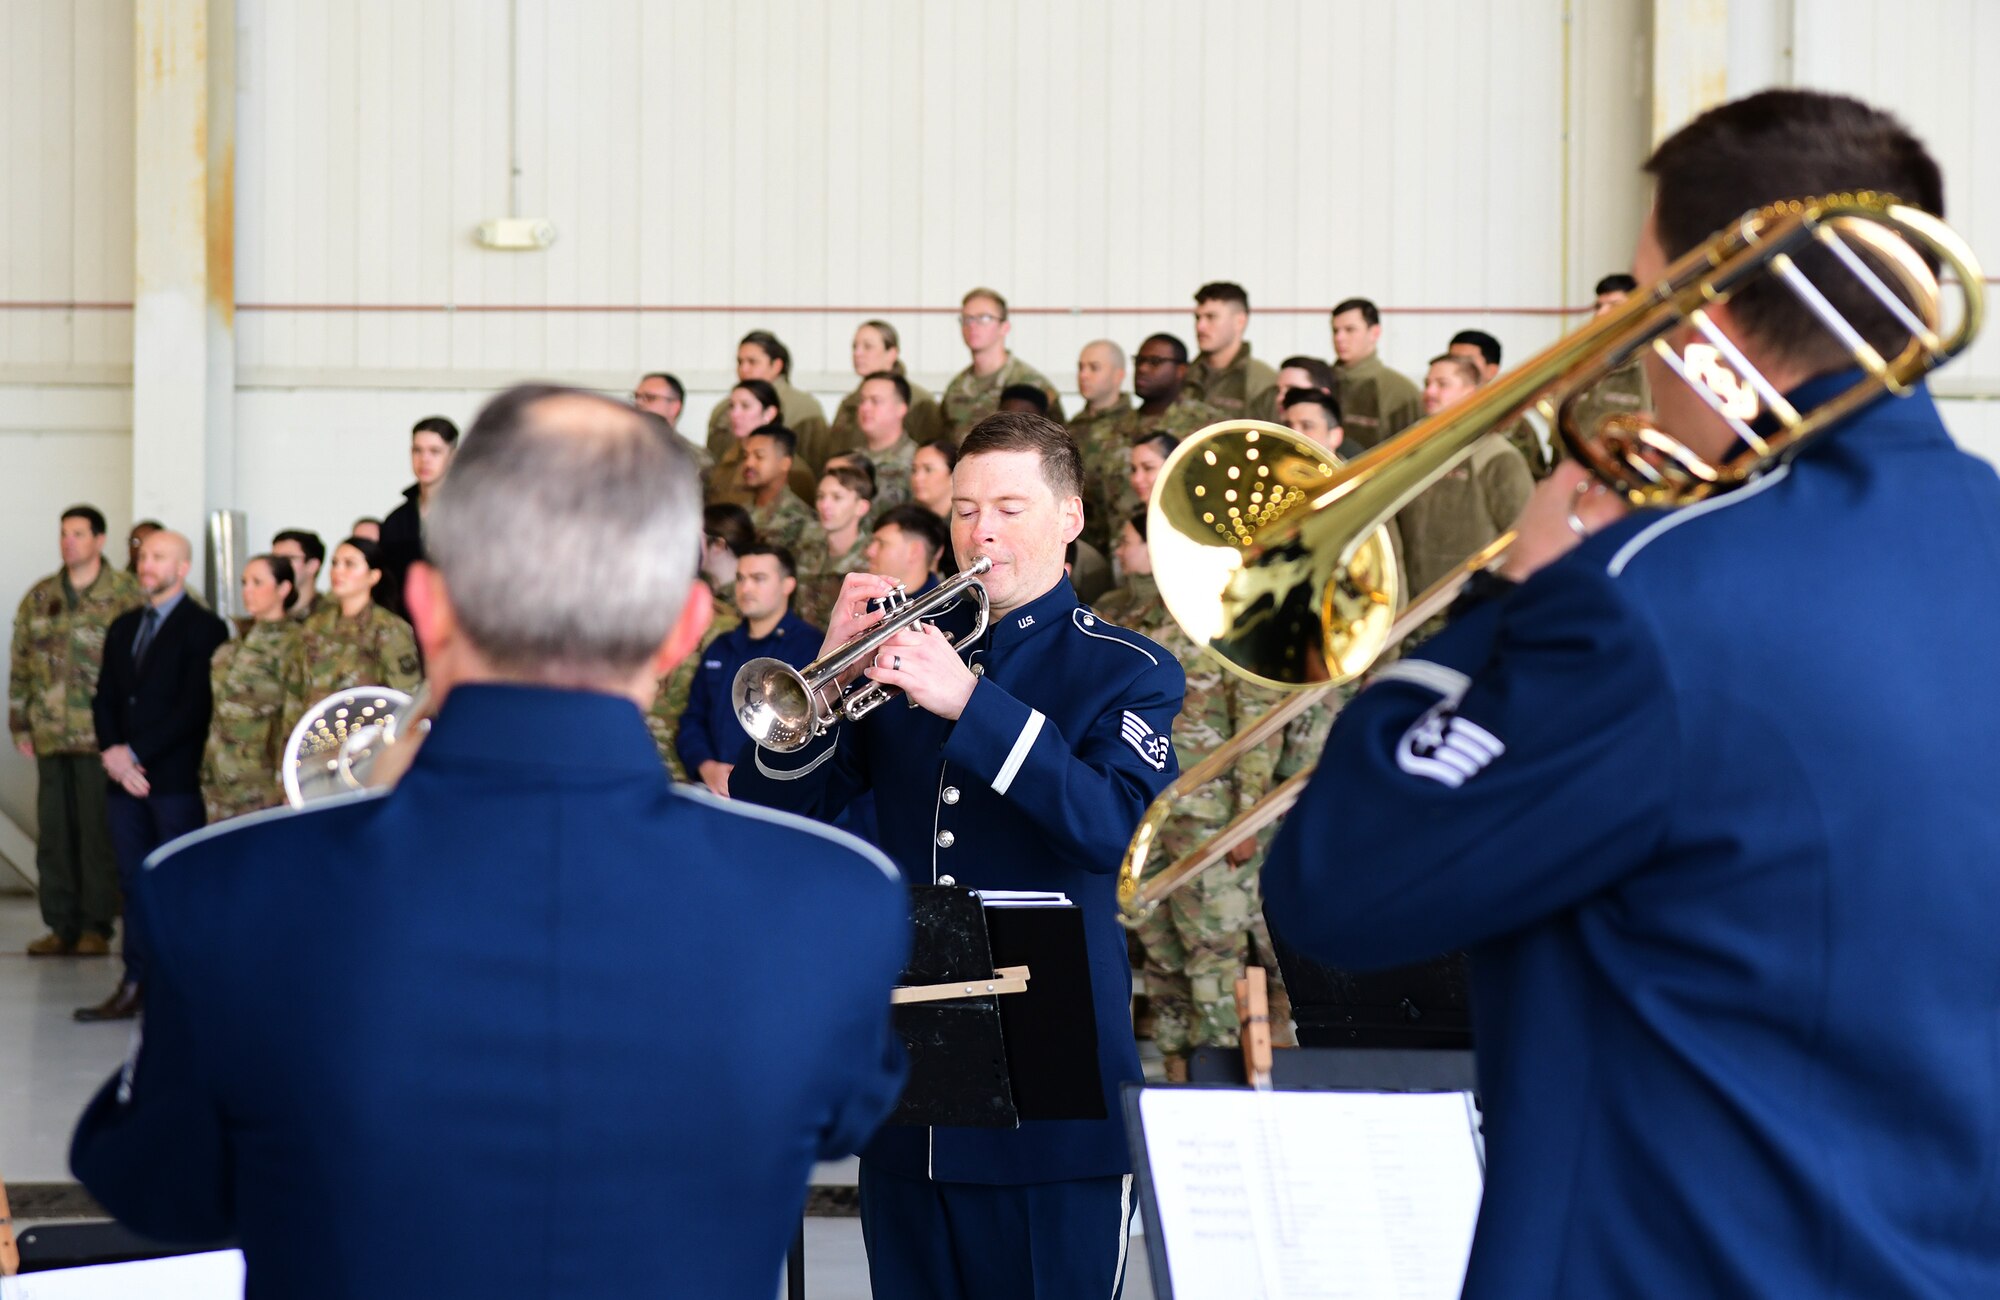 A photo of the band playing.